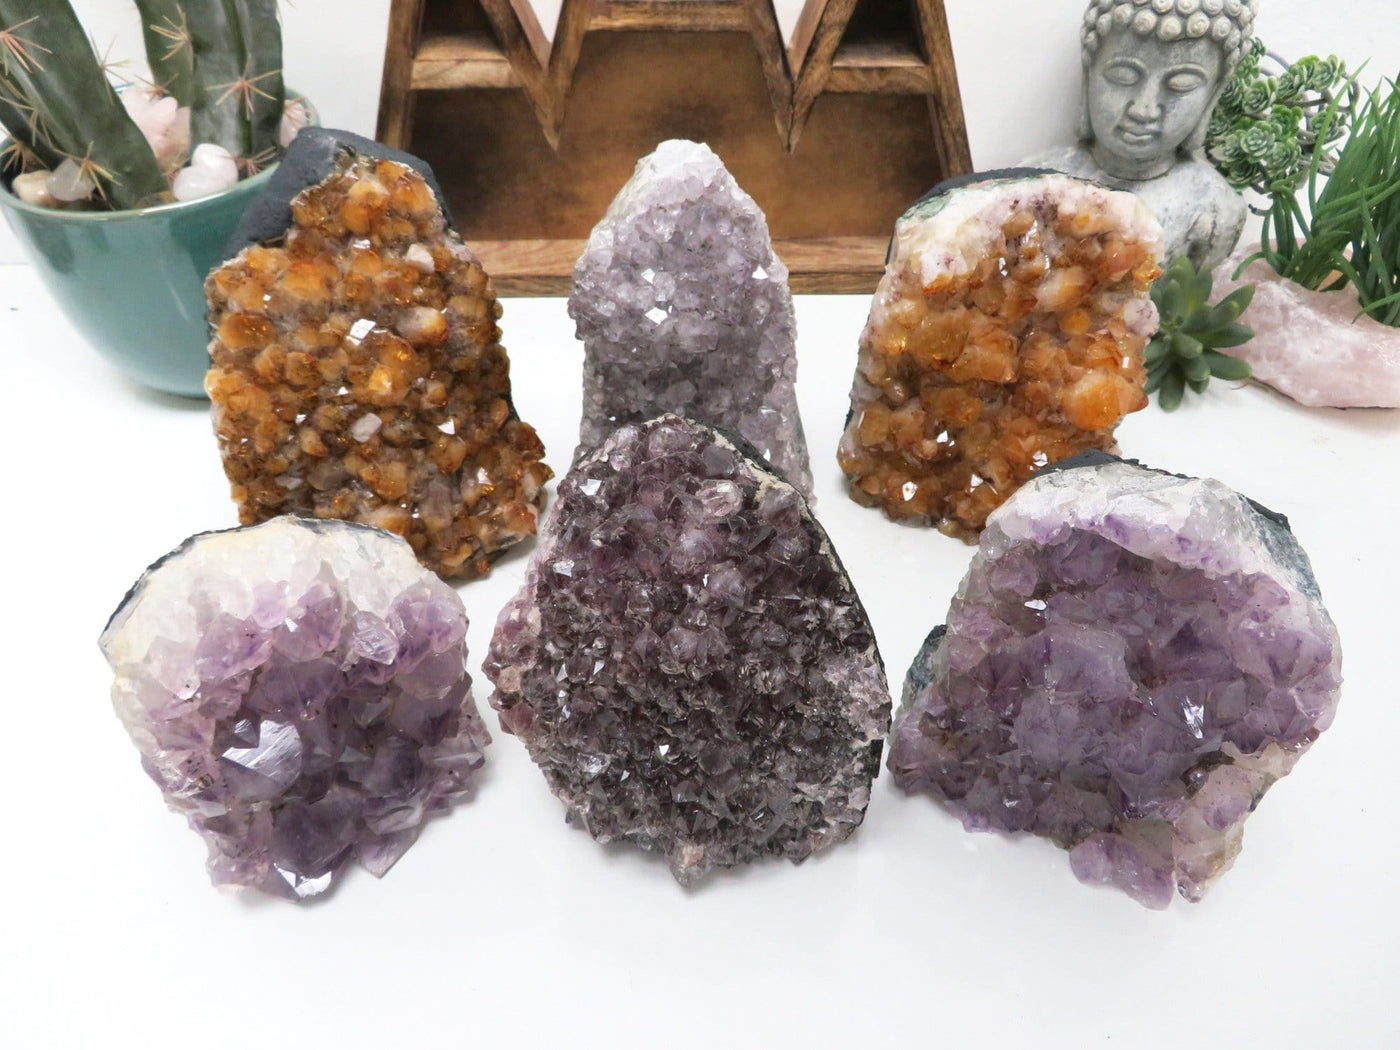 multiple Amethyst and Citrine (heat treated amethyst) Cluster Geode Cut Bases displayed to show various formations and color hues